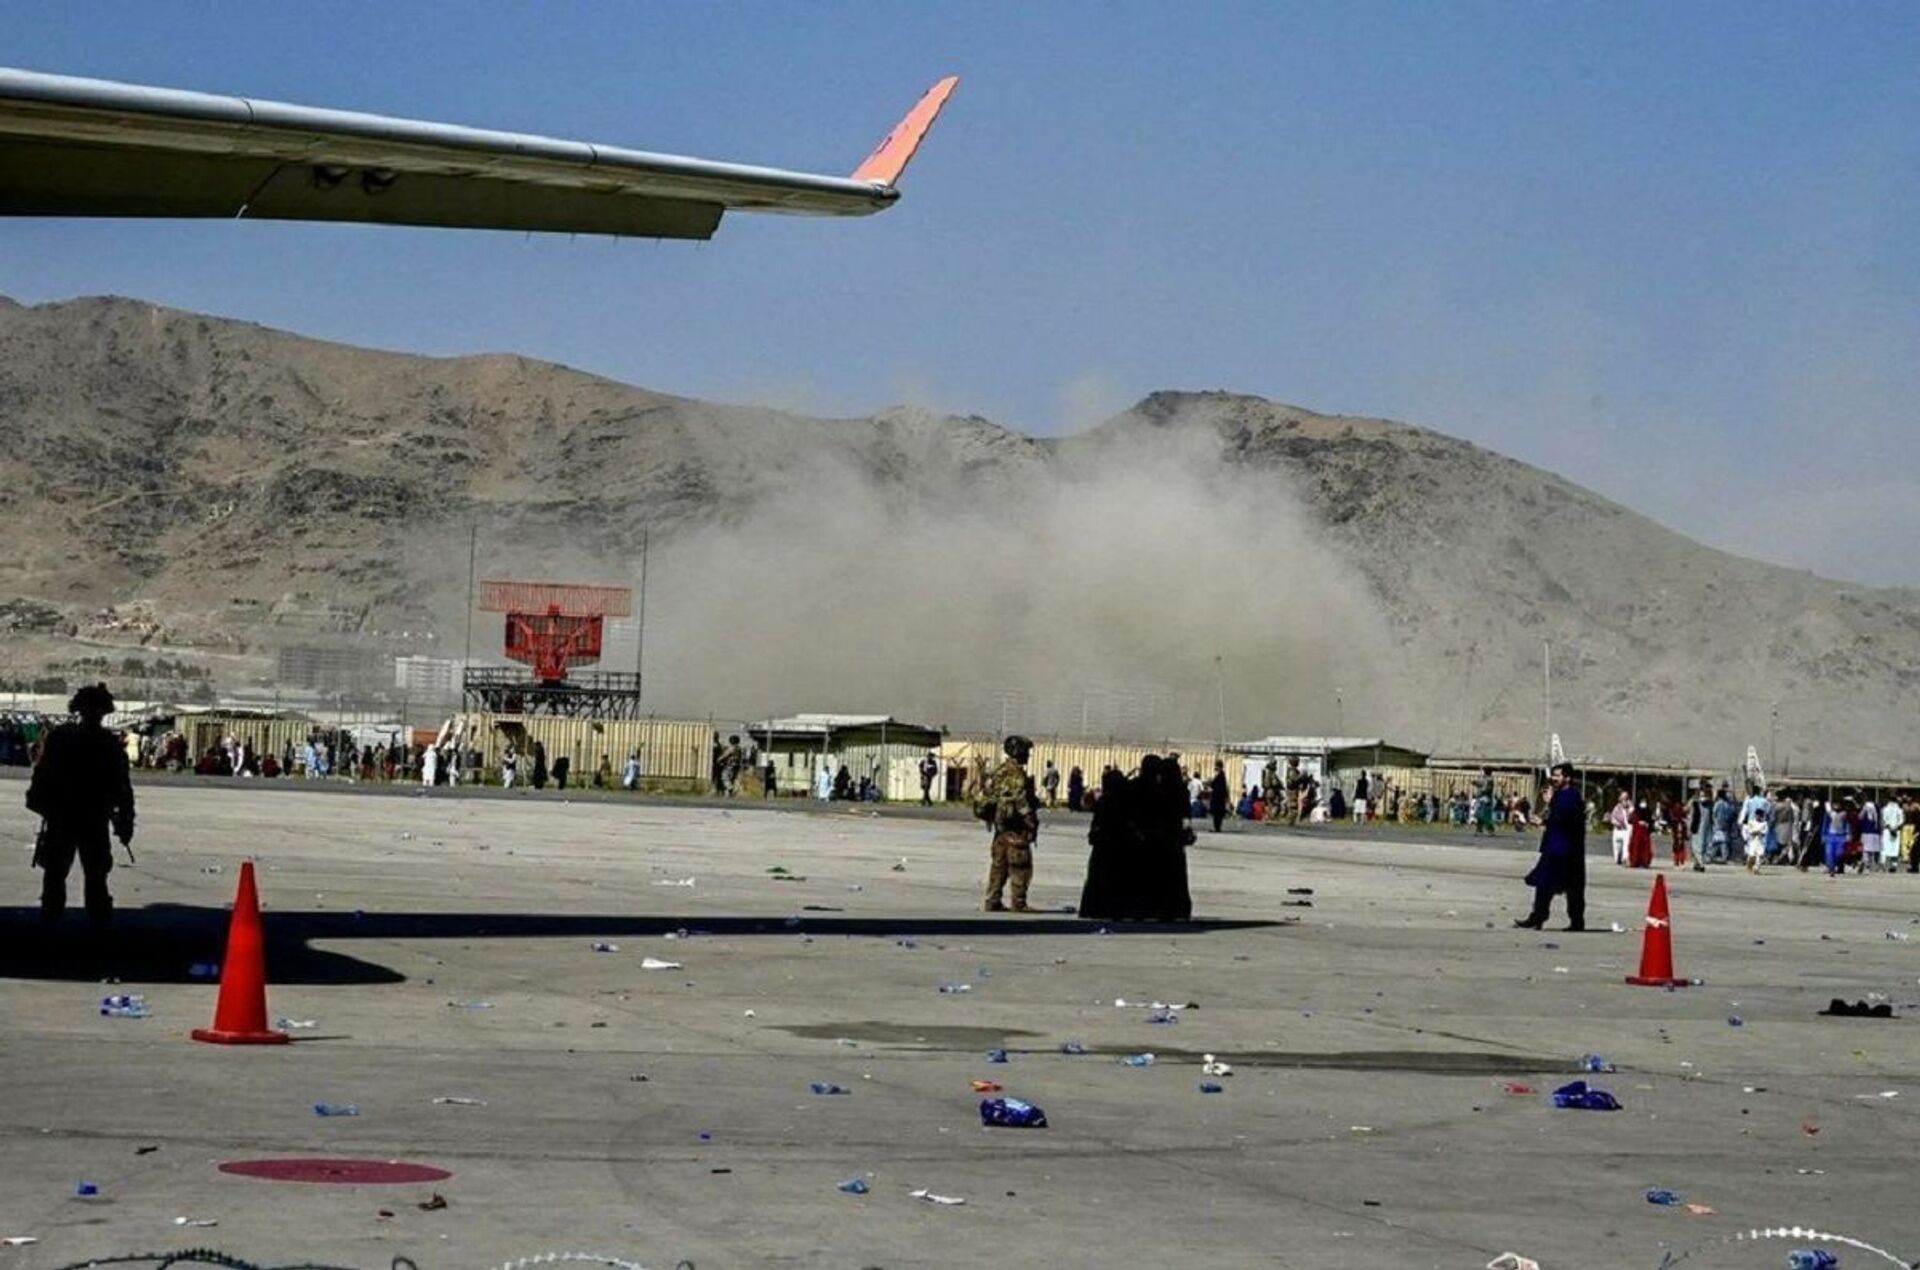 The moment when the explosion occurred at Kabul airport - Sputnik International, 1920, 07.09.2021